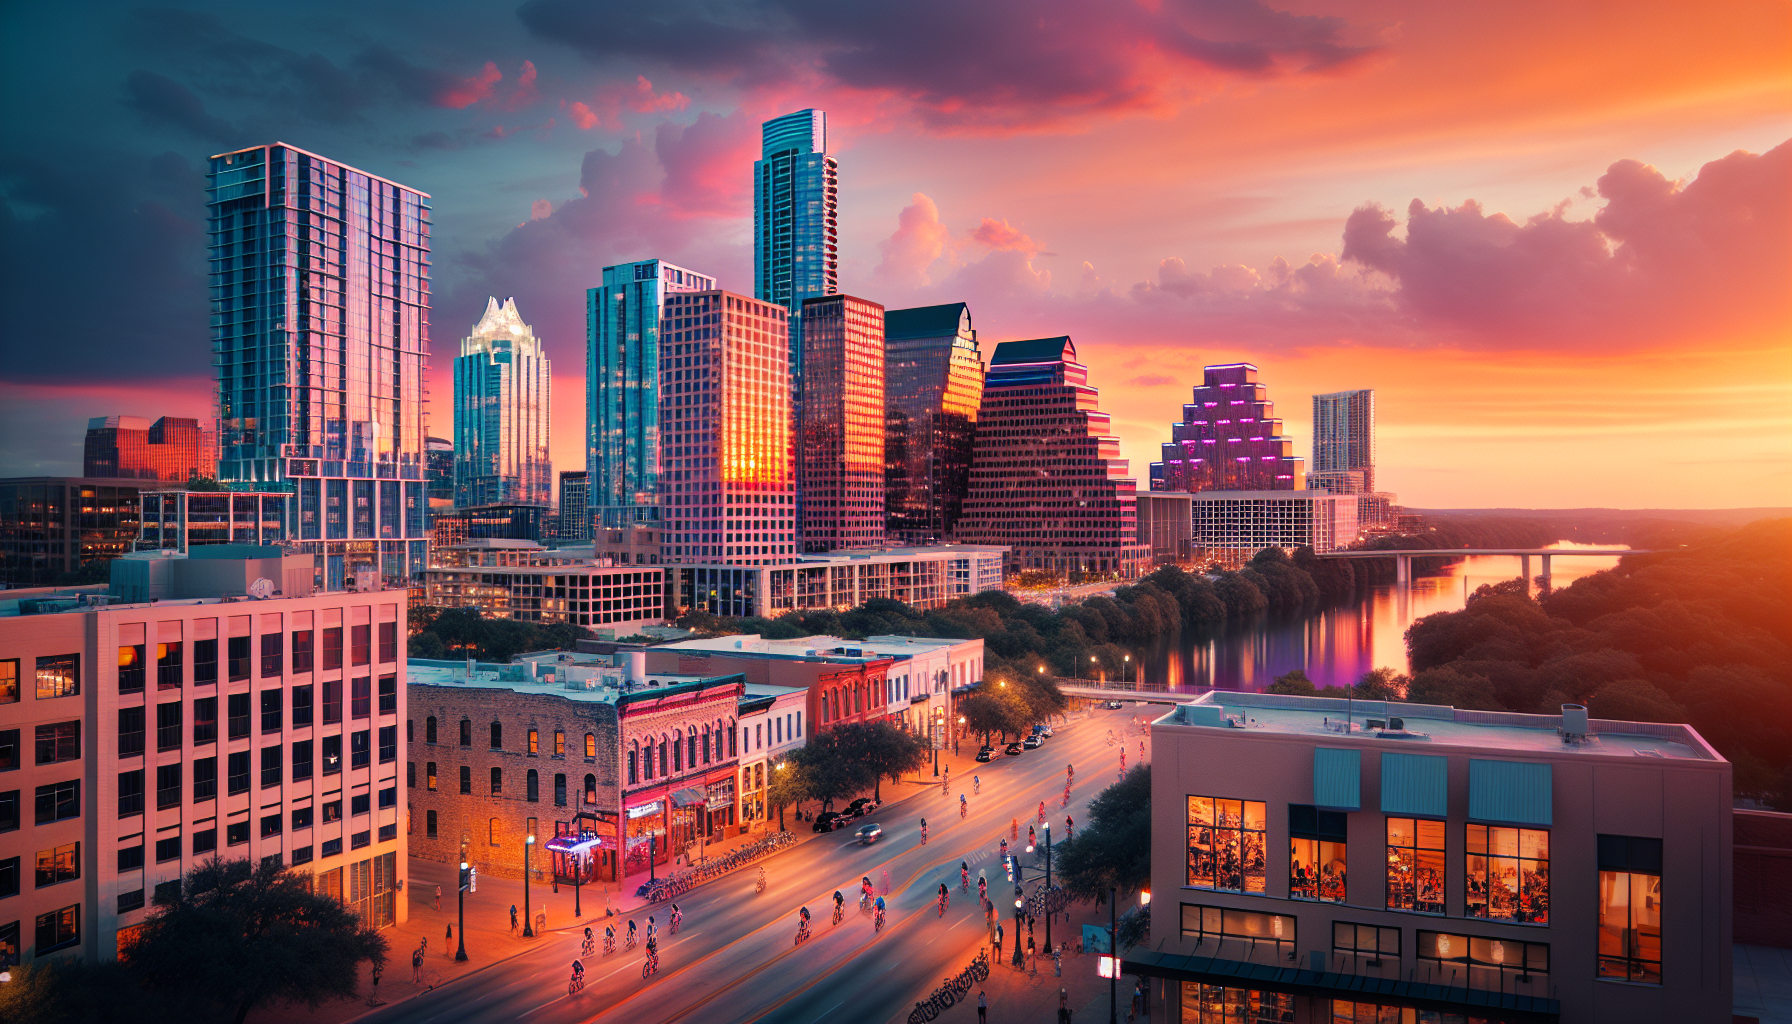 Austin city skyline at sunset with a focus on urban living